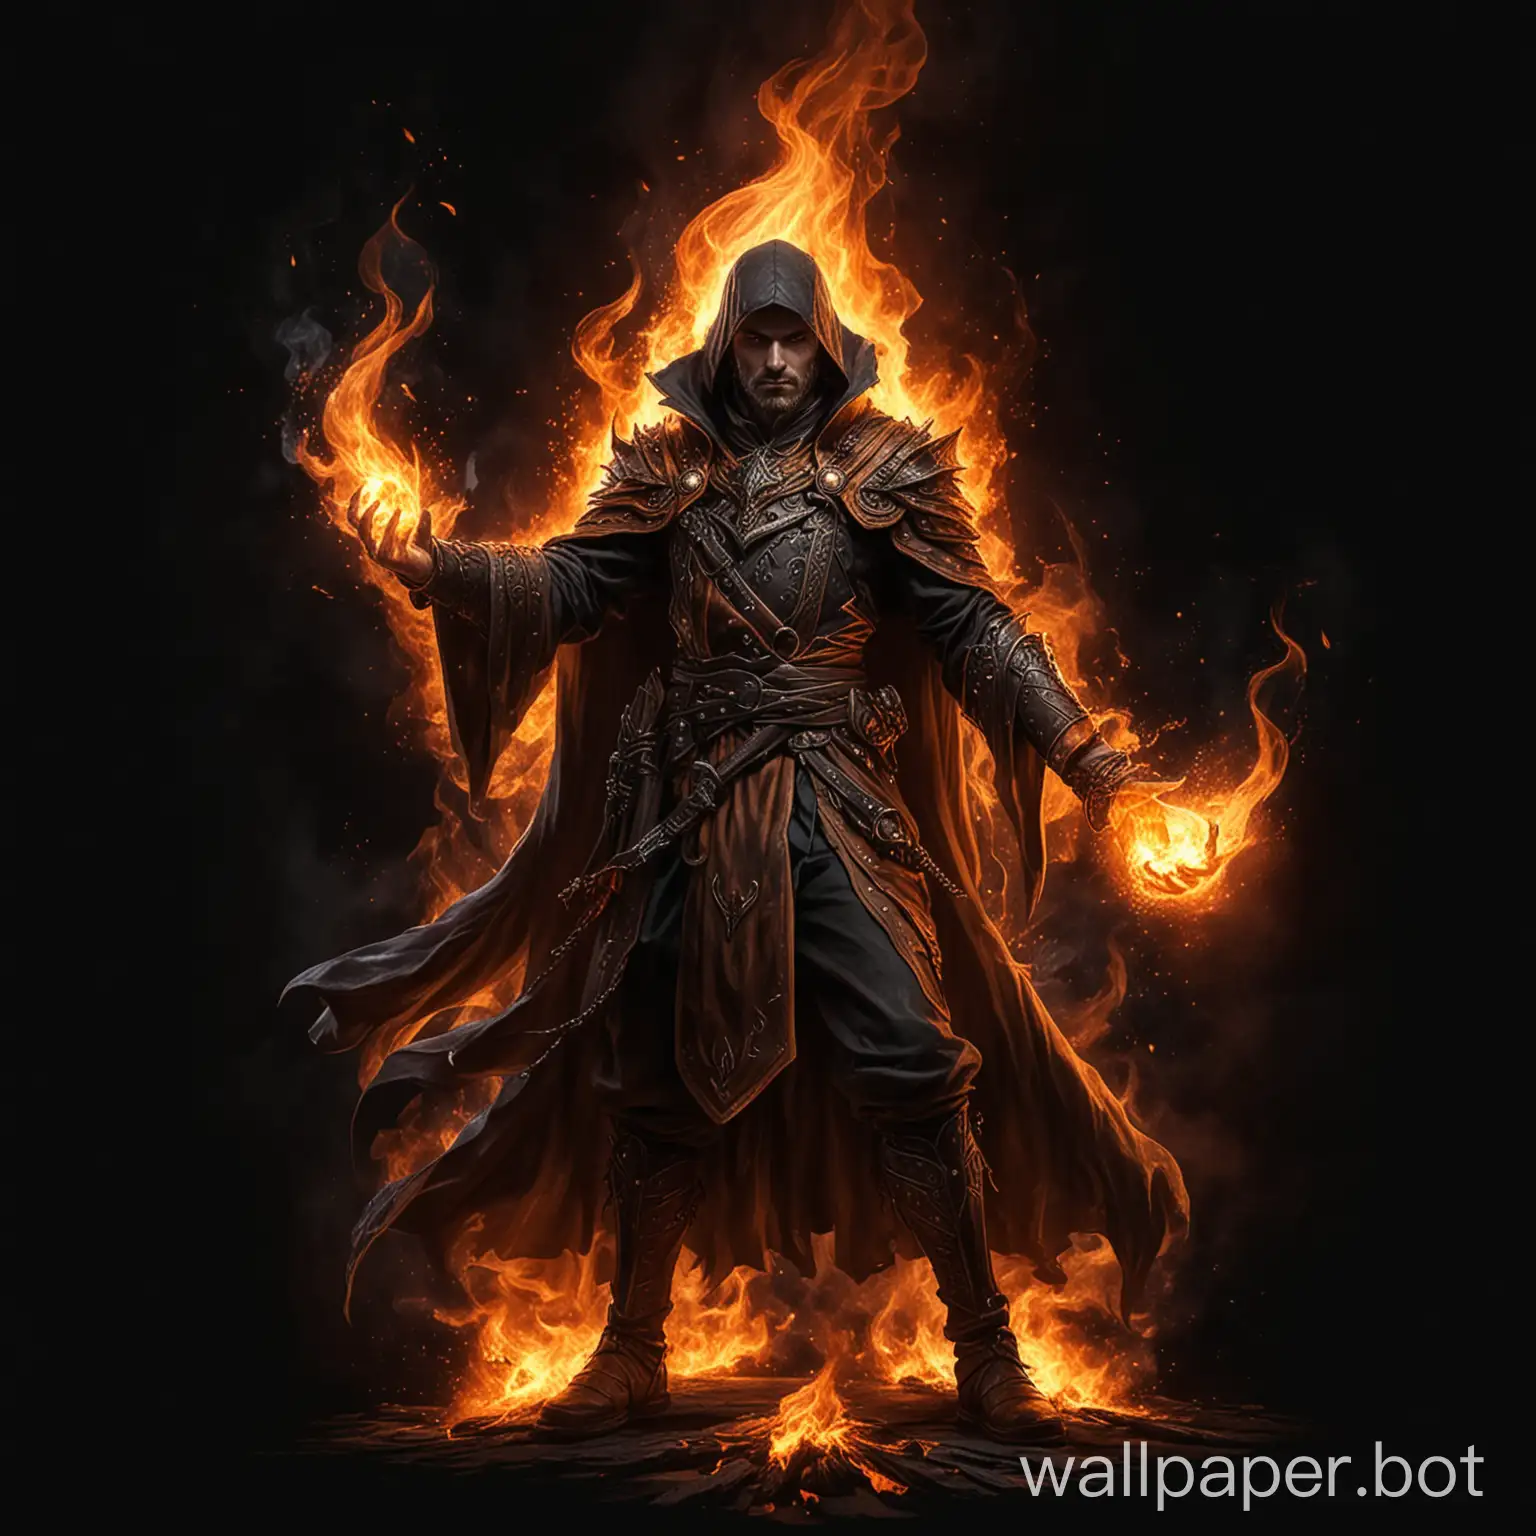 draw a fantasy mage burning with magical flames on a black background